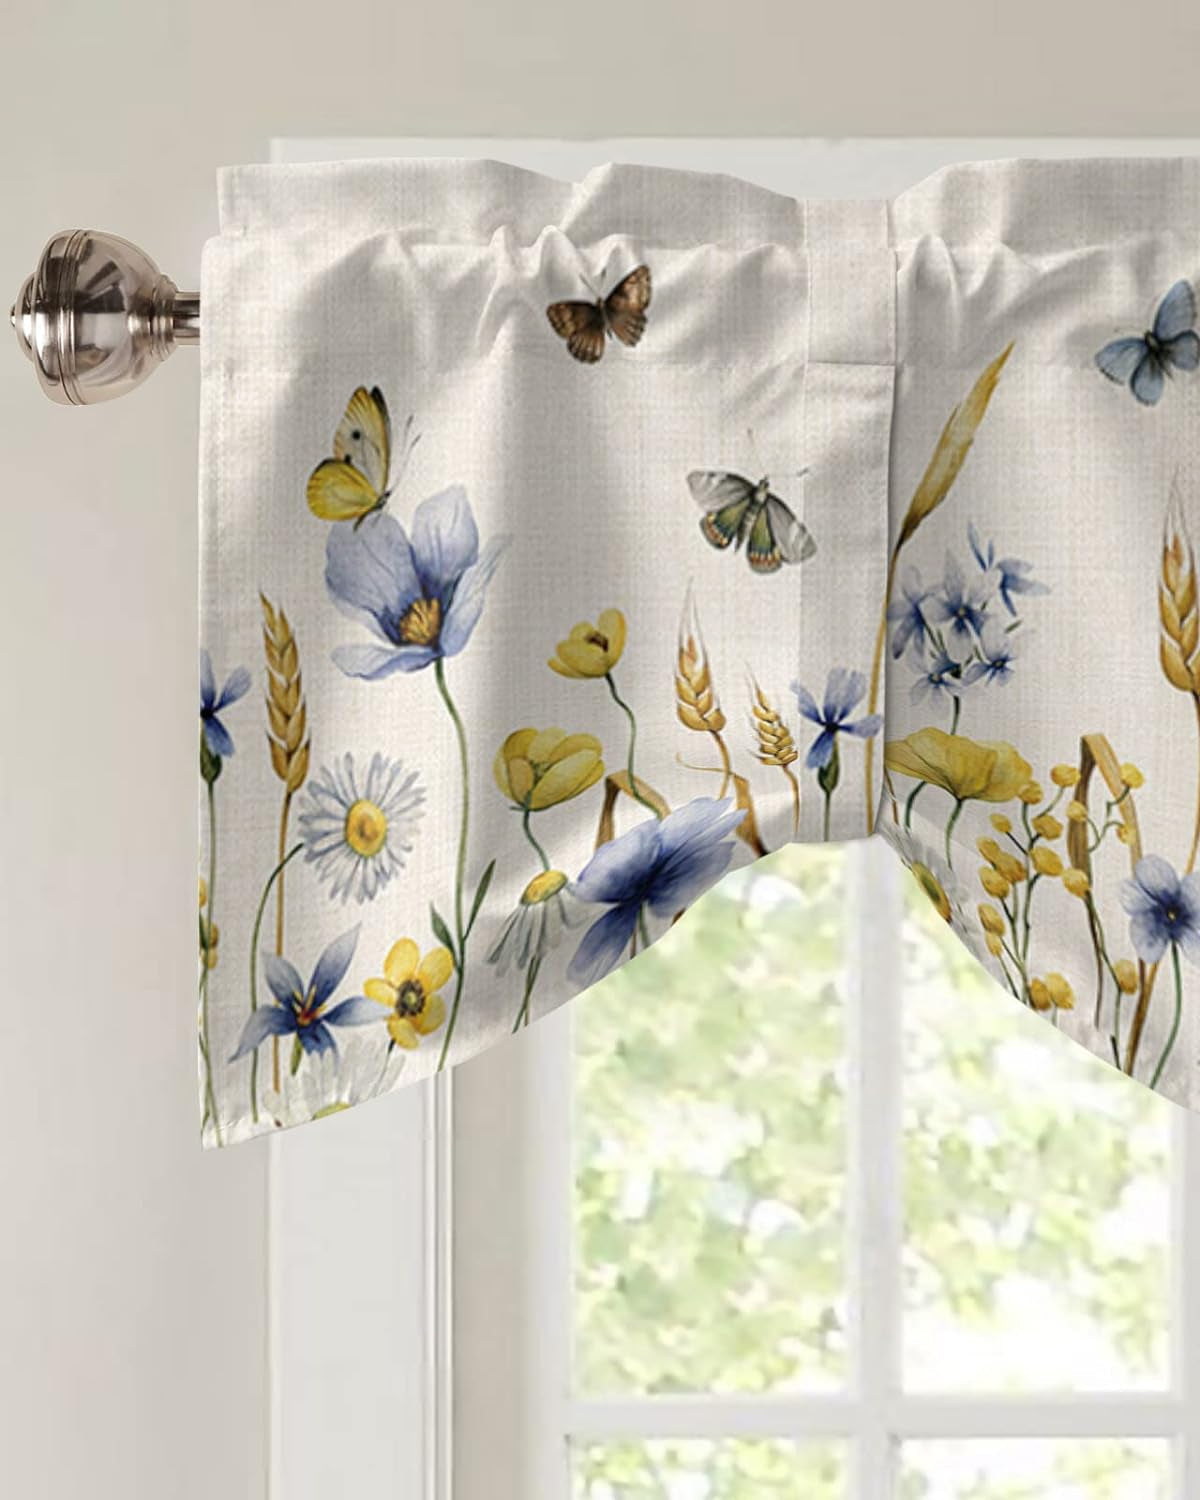 Butter-Fly Leaves Tie up Valance Curtain for Kitchen Living Room Bedroom Bathroom Cafe,Rod Pocket Short Window Drape Panel Adjustable Drapary Print,Elegant Fall Yellow Blue Yellow Daisy Beige 54"X18"